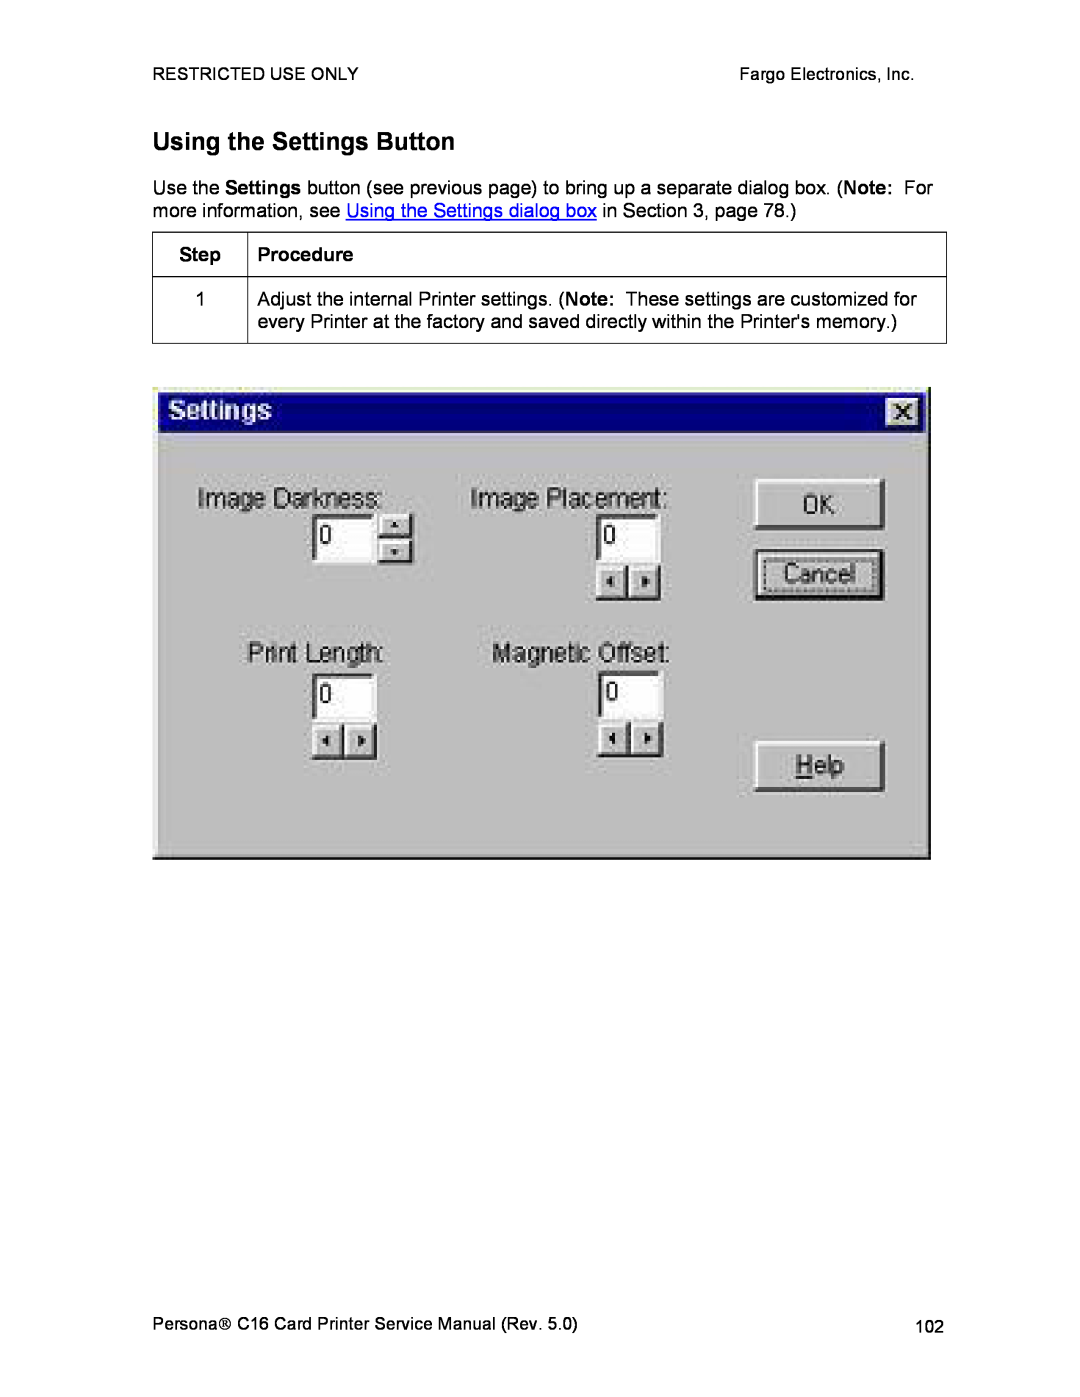 FARGO electronic C16 service manual Using the Settings Button 